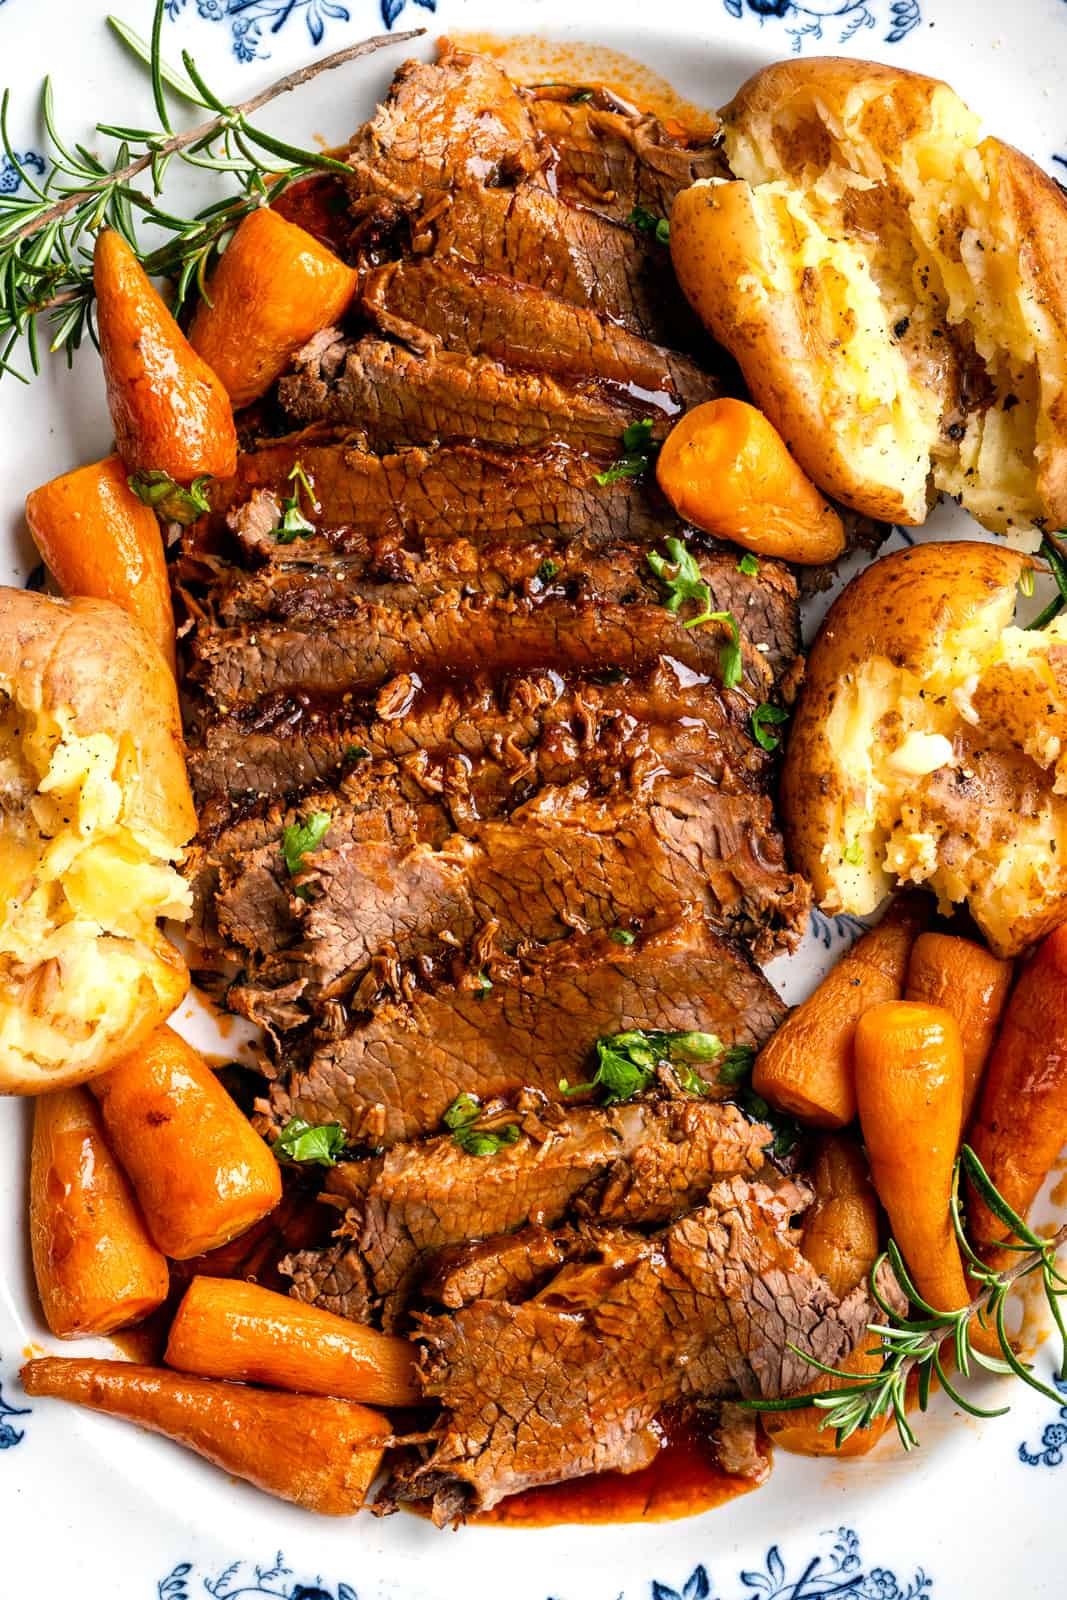 Close up on a platter of slices brisket served with carrots, potatoes and gravy